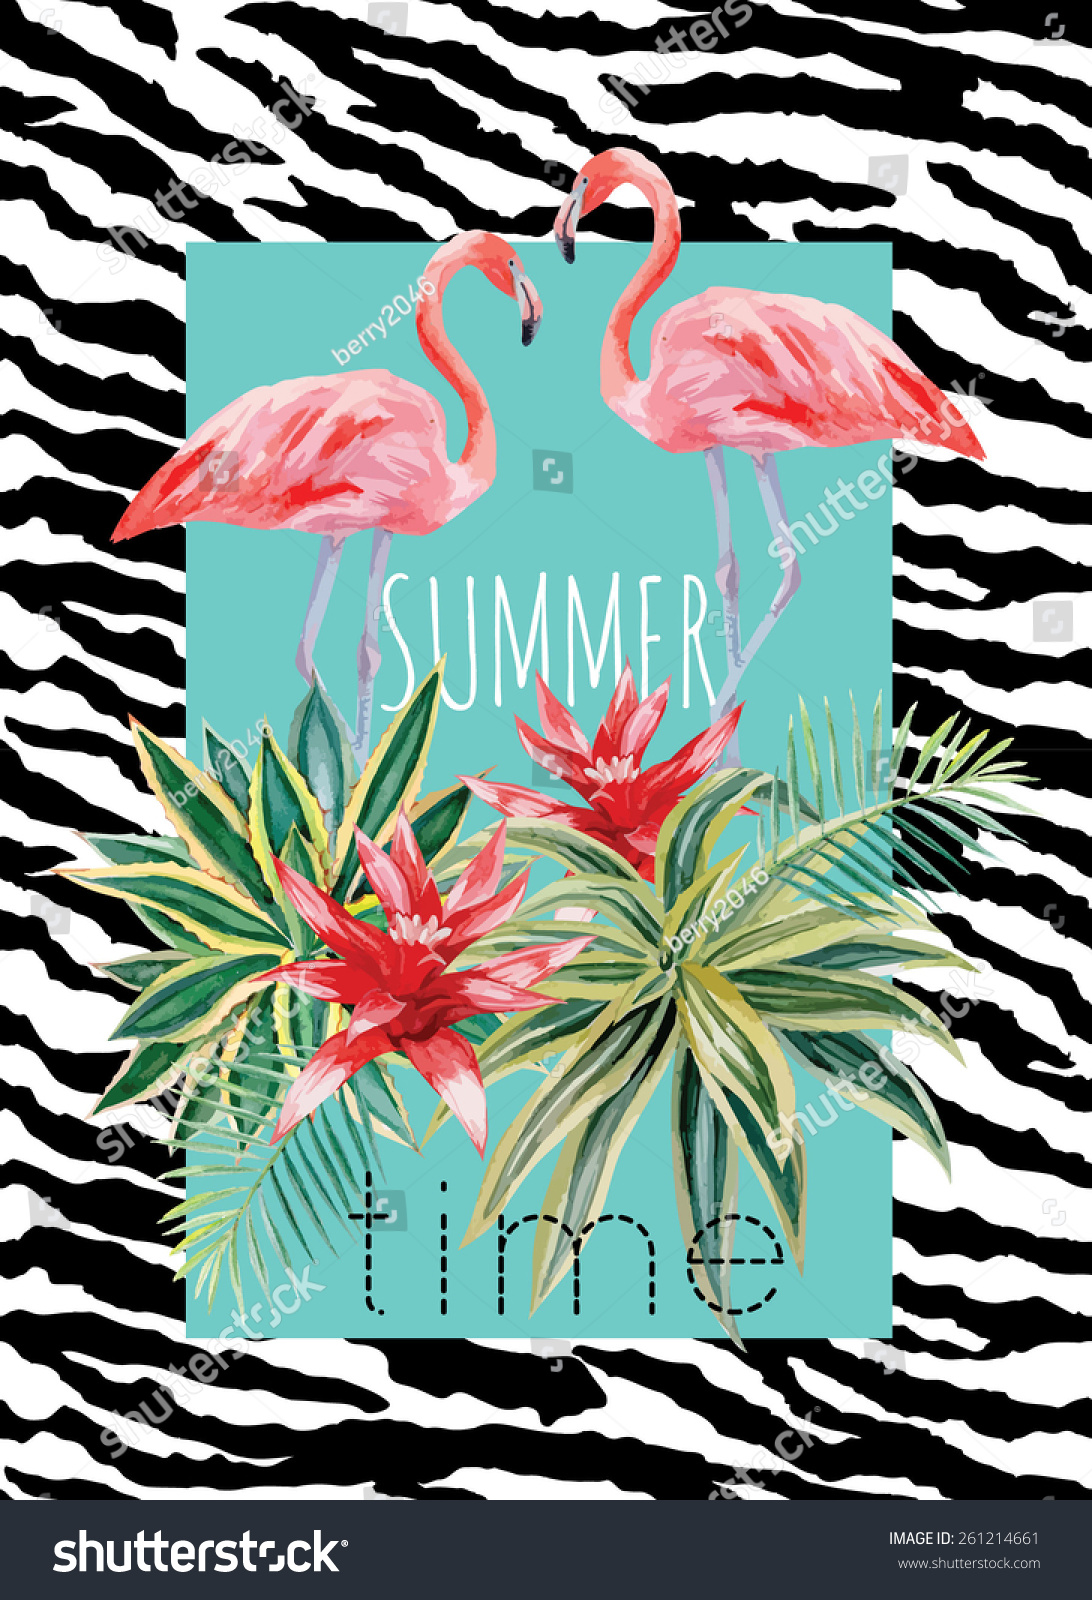 Flamingo And Tropical Plants Watercolor Summer Illustration - 261214661 ...